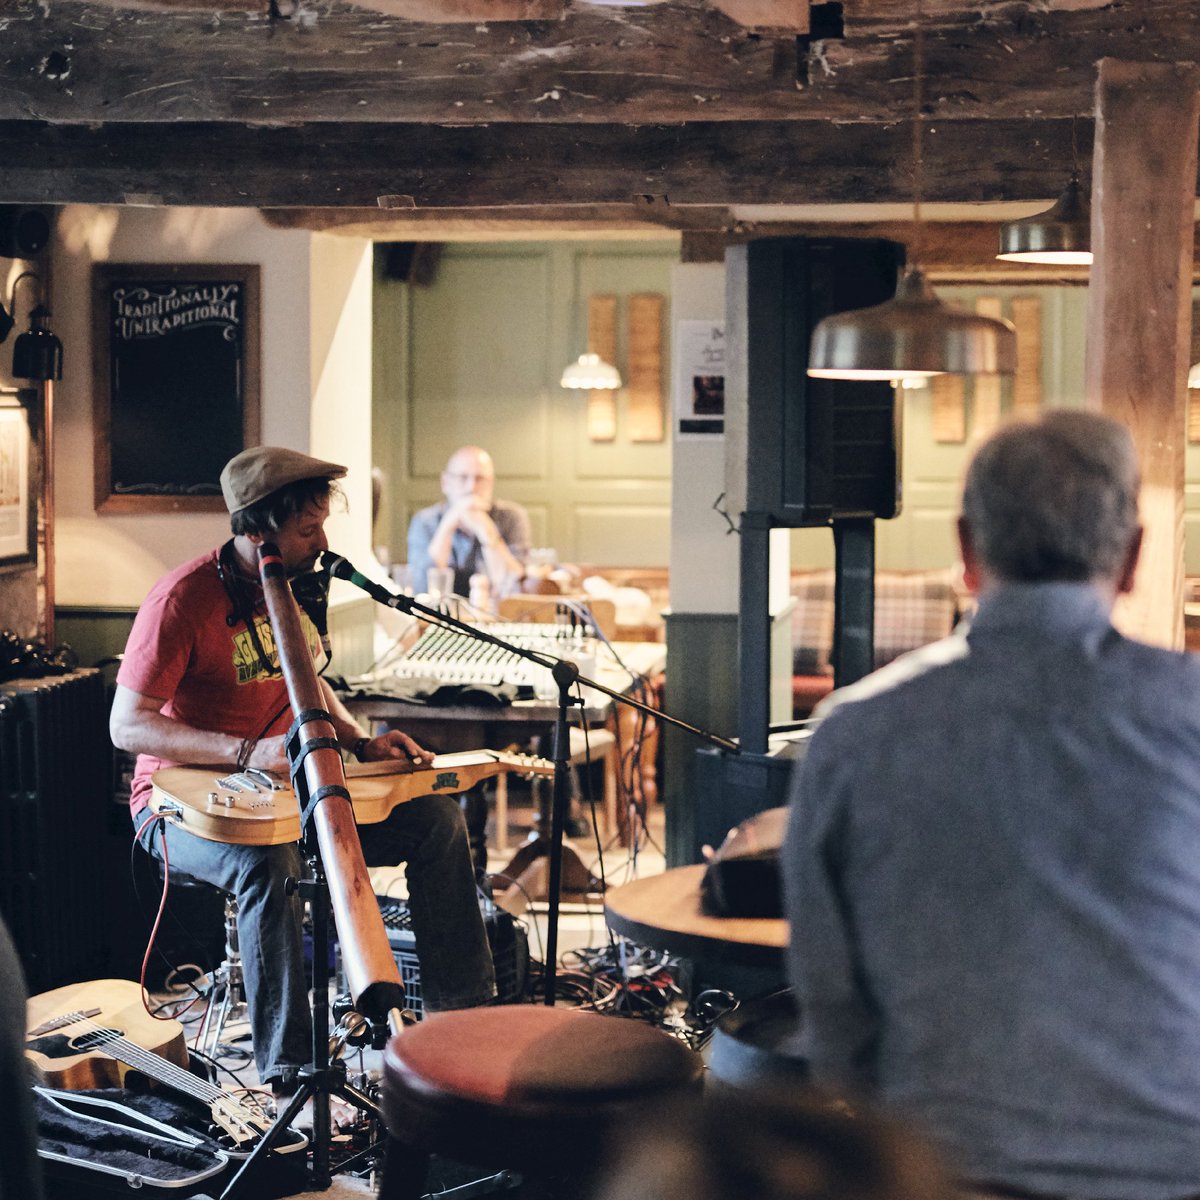 Do you have any favourite local bands you'd like to see playing at The Litton?
We'd love to hear your suggestions! #supportyourlocal

#southwestbands #callformusicians #welovelivemusic #livemusicsomerset
#countrypub #boutiquehotel #somerset #thelitton #muddystilettos #sawdays